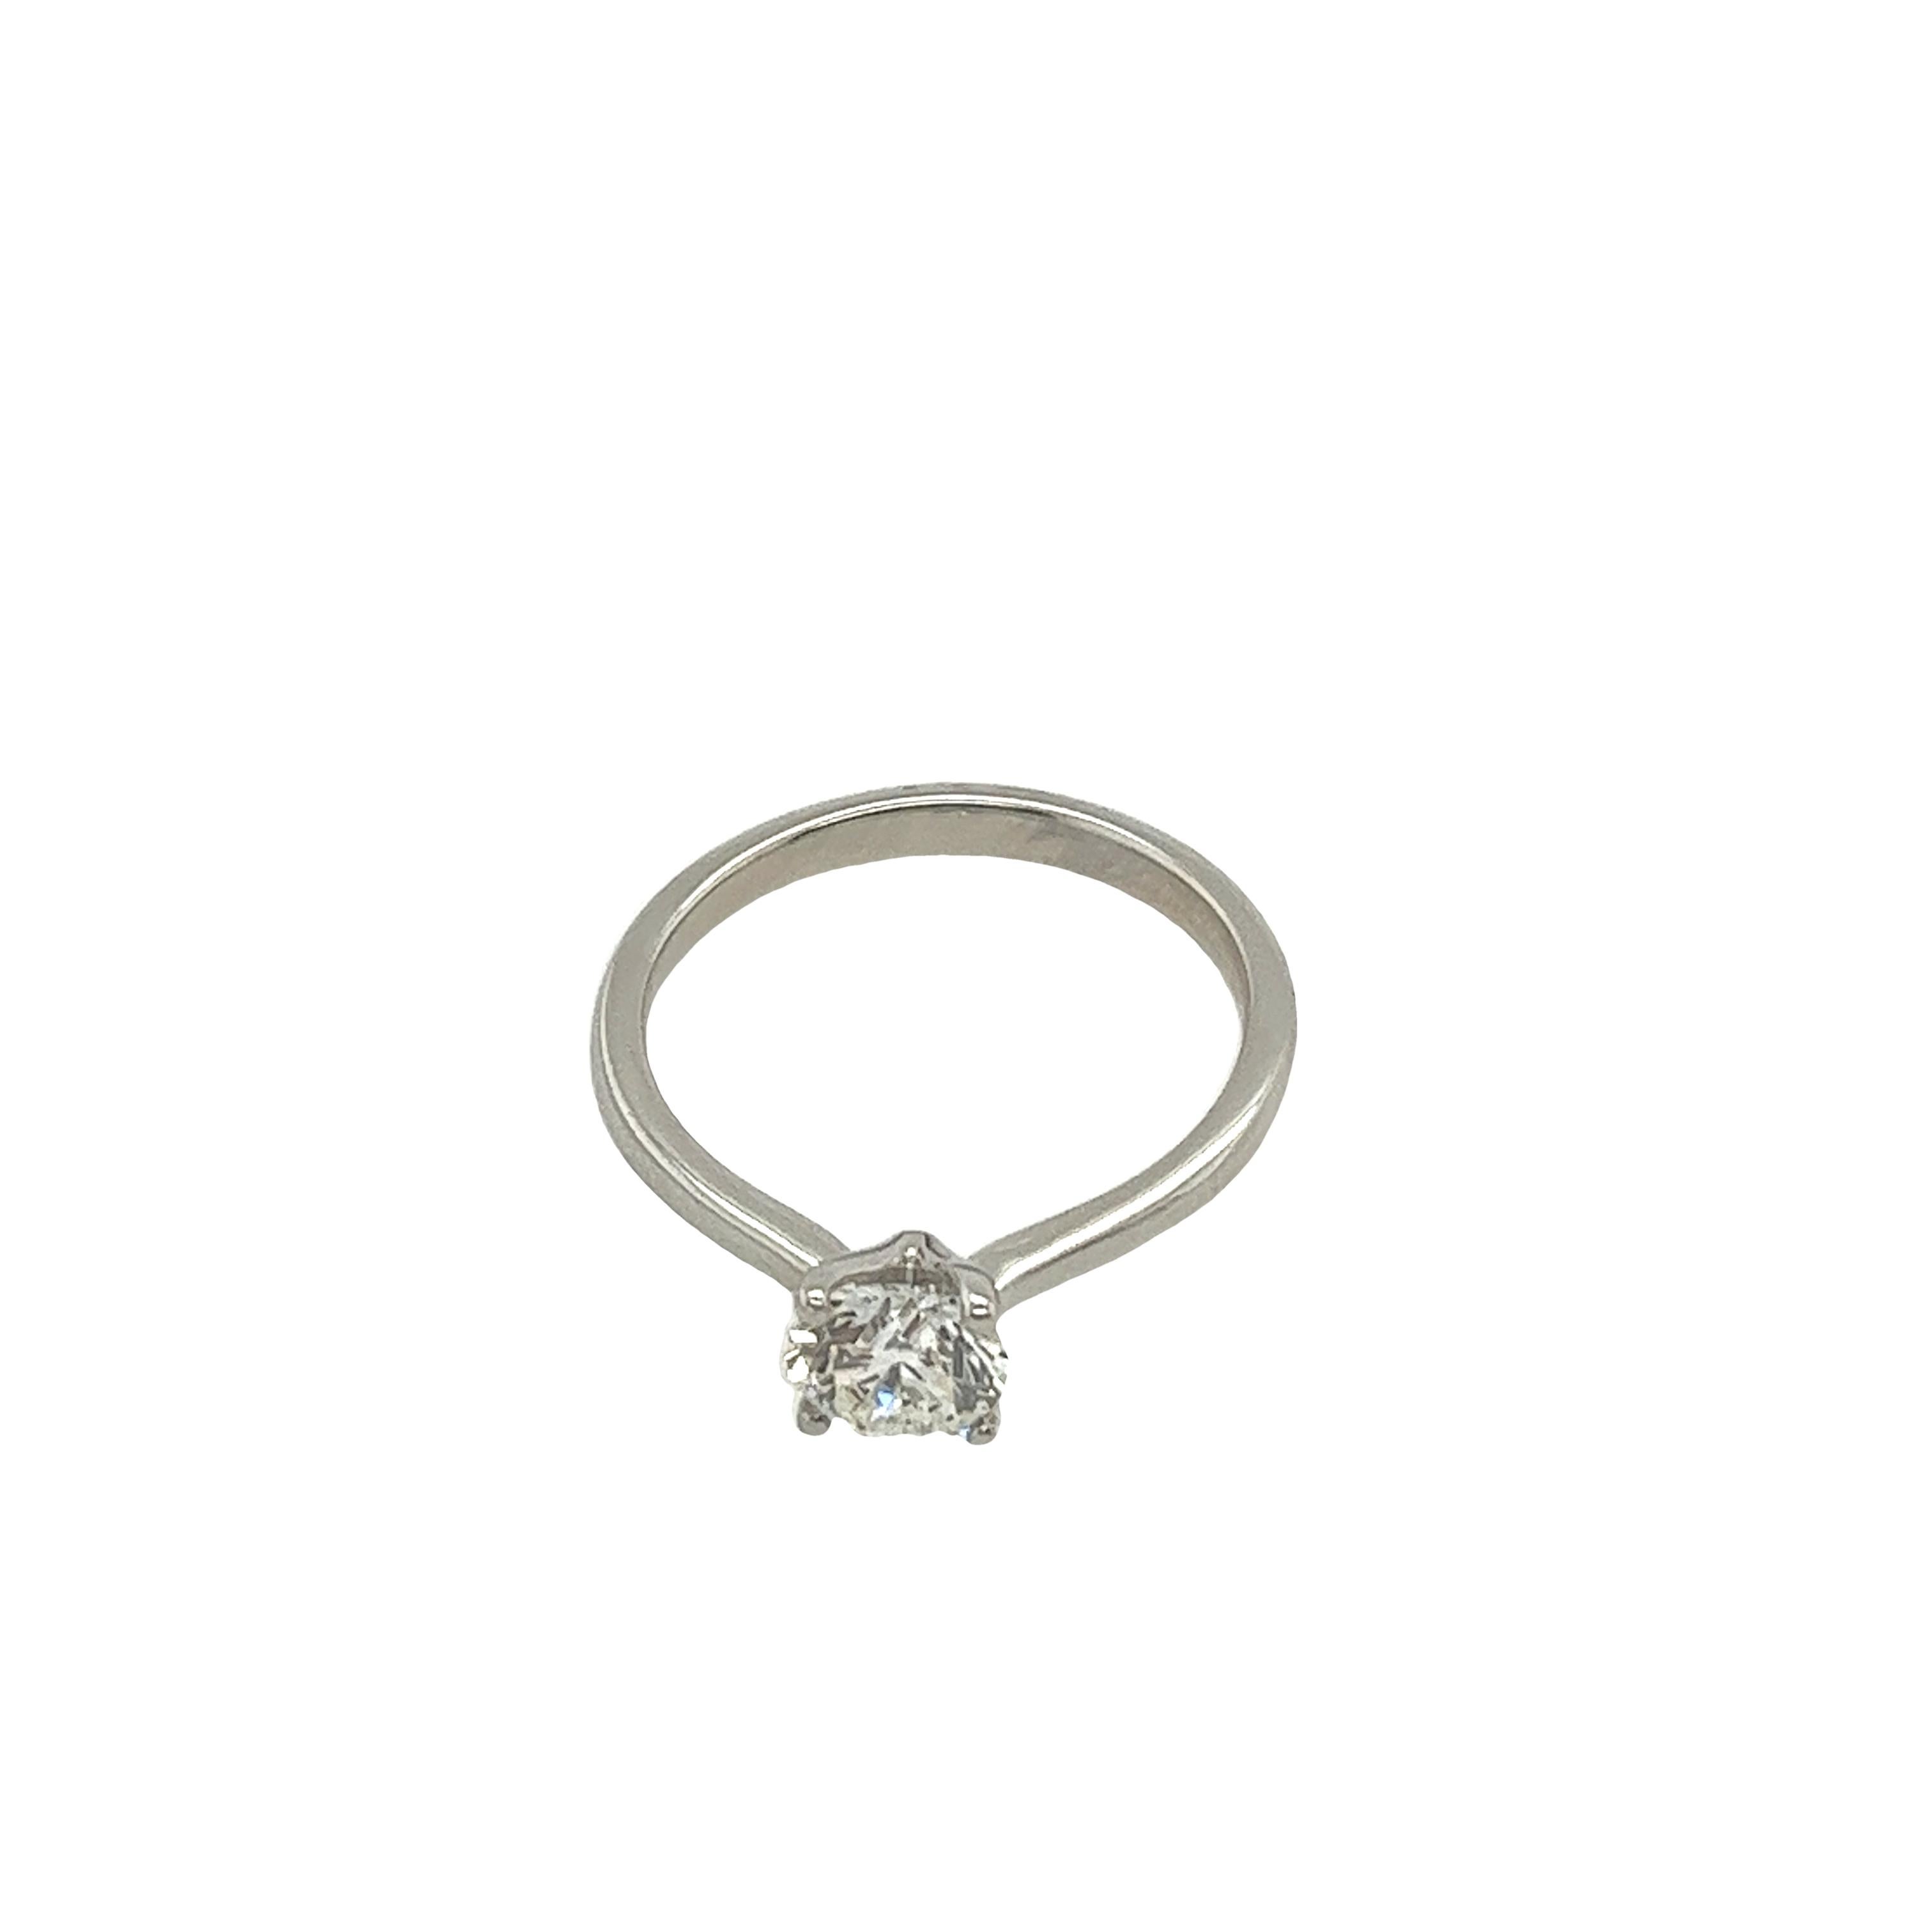 Diamond Solitaire Ring Set With 0.80ct Round Brilliant Cut Diamond For Sale 1